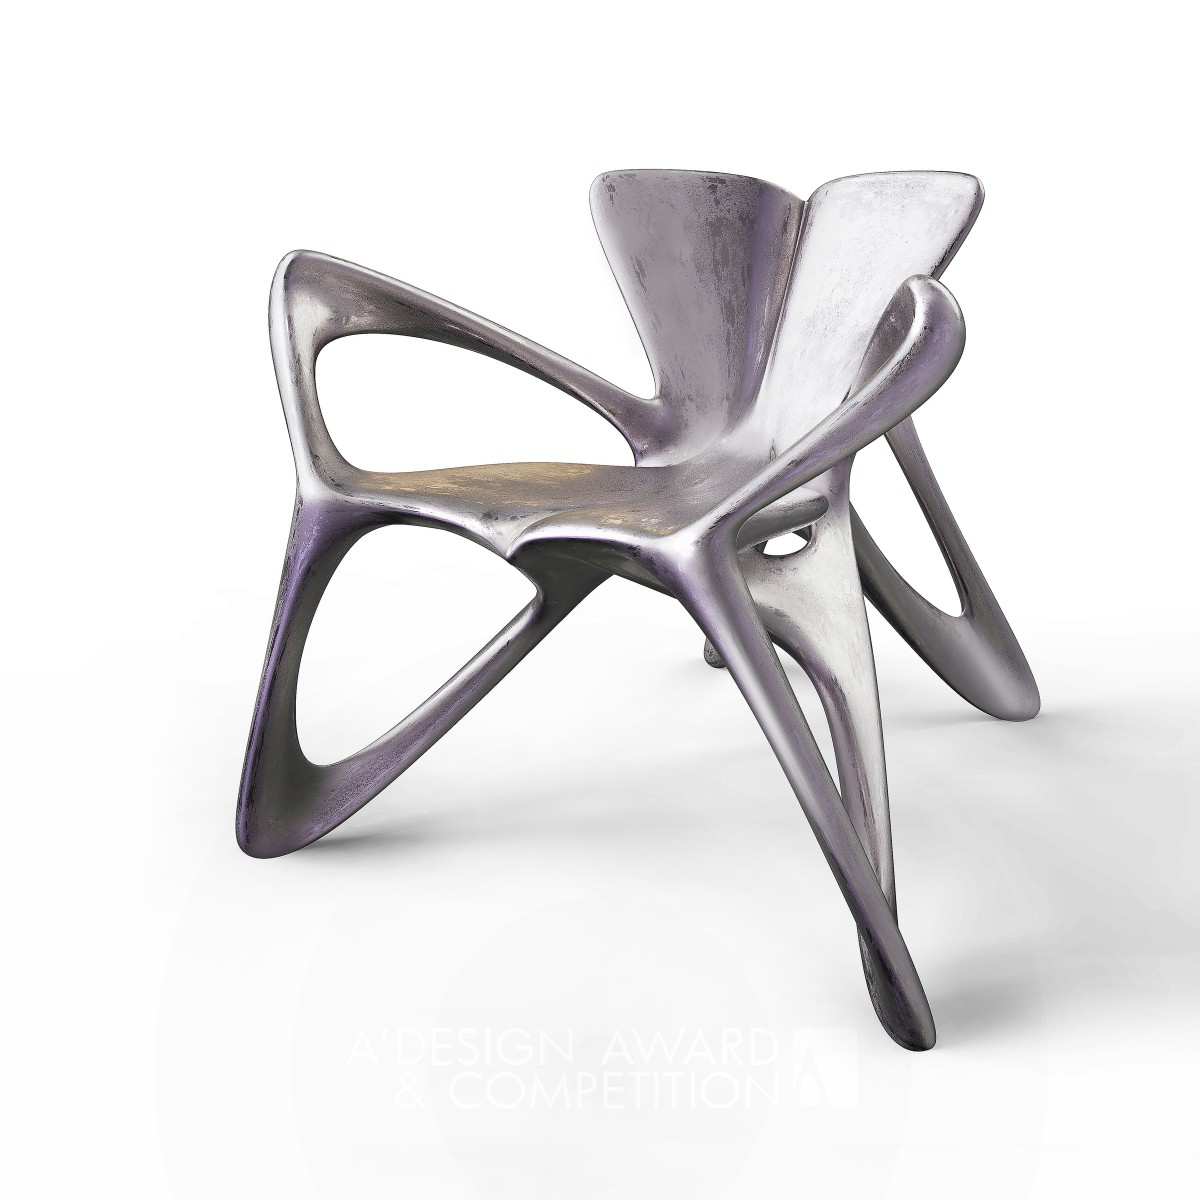 Wei Jingye wins Bronze at the prestigious A' Furniture Design Award with Butterfly Chair.